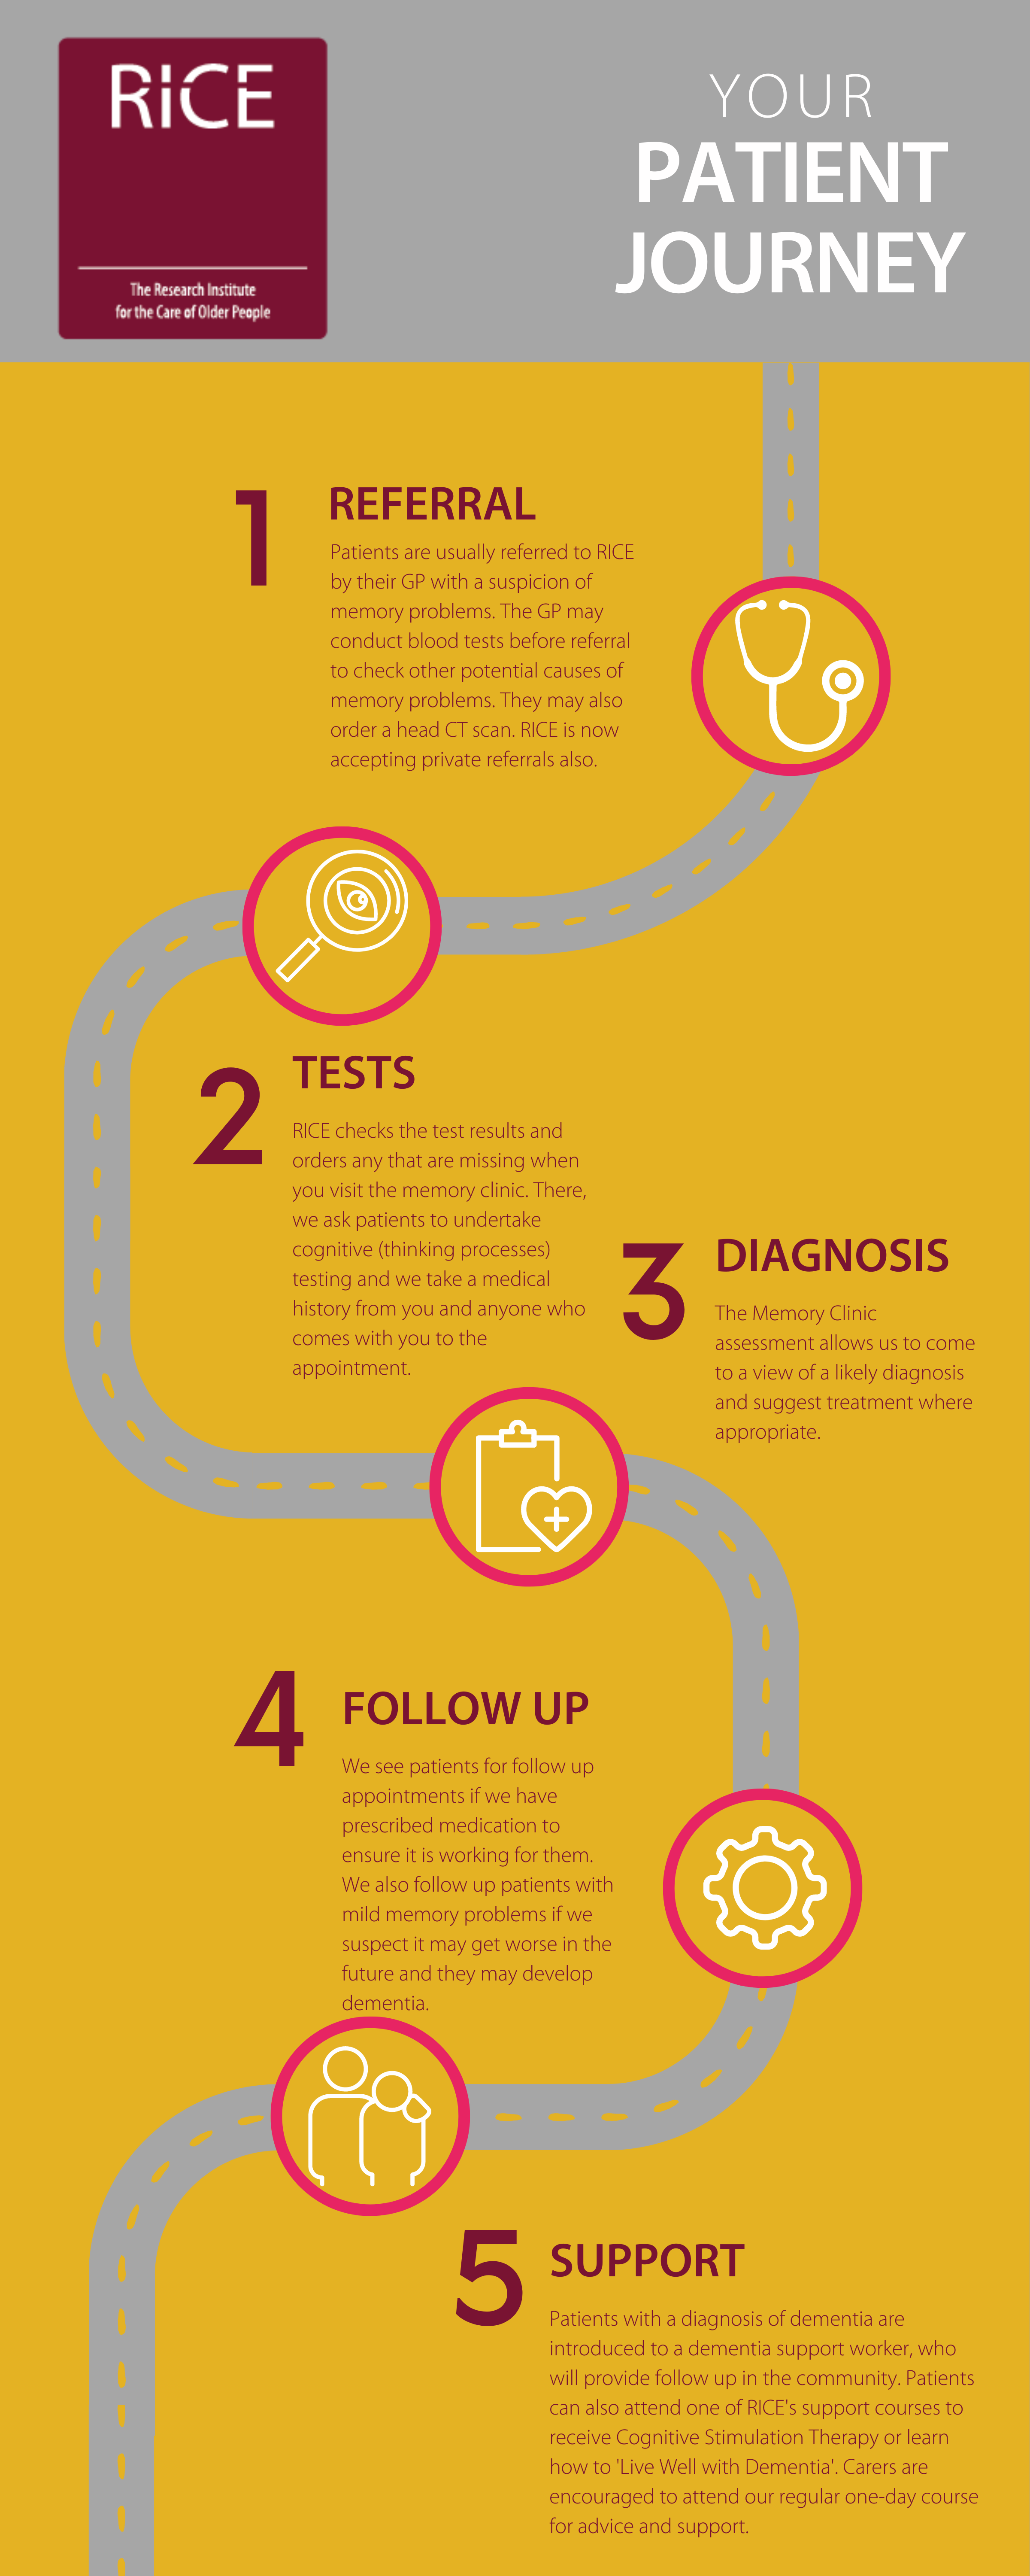 Roadmap infographic showing the five steps of a patient journey at the Research Institute for the Care of Older People. From referral, to testing, diagnosis, follow up and support.

1. Referral. Patients are usually referred to RICE by their GP with a suspicion of memory problems. The GP may conduct blood tests prior to check other potential causes. They may also order a head CT scan. RICE now accepts private referrals too.

2. Tests. RICE checks the test results and orders any that are missing when a patient visits the memory clinic. At the appointment we ask patients to undertake cognitive testing (for thinking processes) and we take a full medical history from you and anyone who attends with you. 

3. Diagnosis. The memory clinic assessment allows us to come to a likely diagnosis and suggest treatment where appropriate.

4. Follow up. We see patients for follow up appointments if we have prescribed medication to ensure it is working for them. We also follow up with patients with mild memory problems if we suspect it may get worse in future.

5. Support. Patients with a diagnosis of dementia are introduced to a dementia support worker, who will provide further follow up help in the community. RICE offers in-house support courses such as Cognitive Stimulation Therapy, or learn to 'Live Well with Dementia'. Carers are encouraged to attend our regular one-day course for advice and support. 